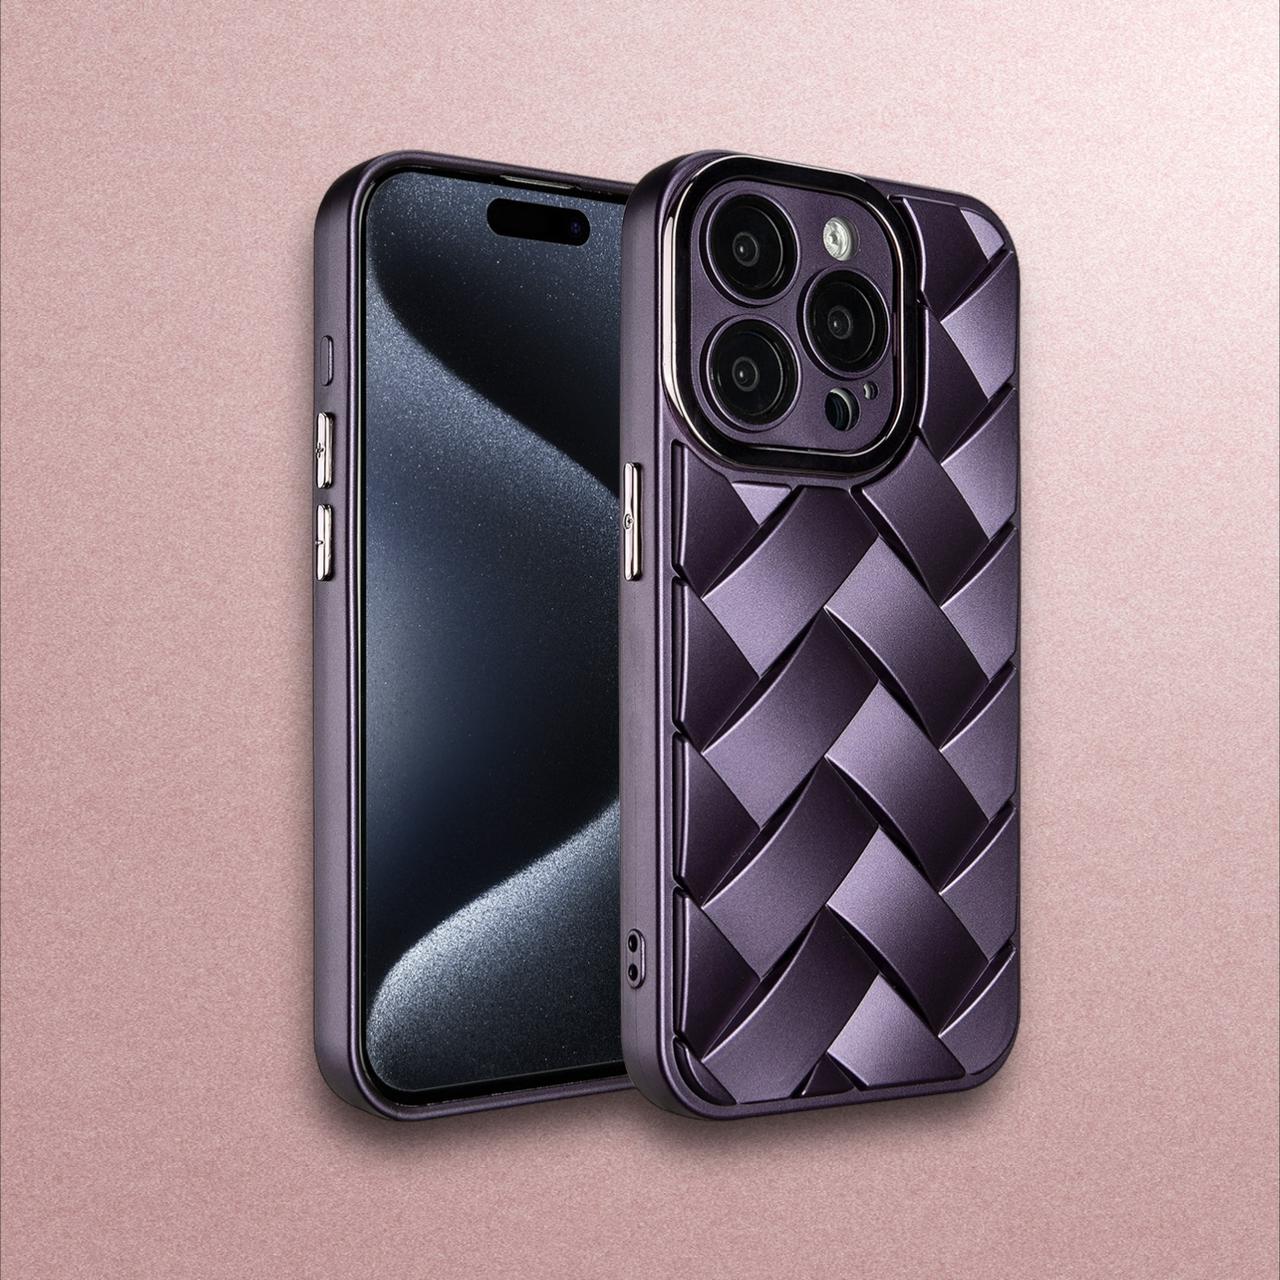 Iphone 12 Pro Max,13 Pro Max,14 ProMax,15 Pro Max :- Matte Frosted Solid Colour Braided Case